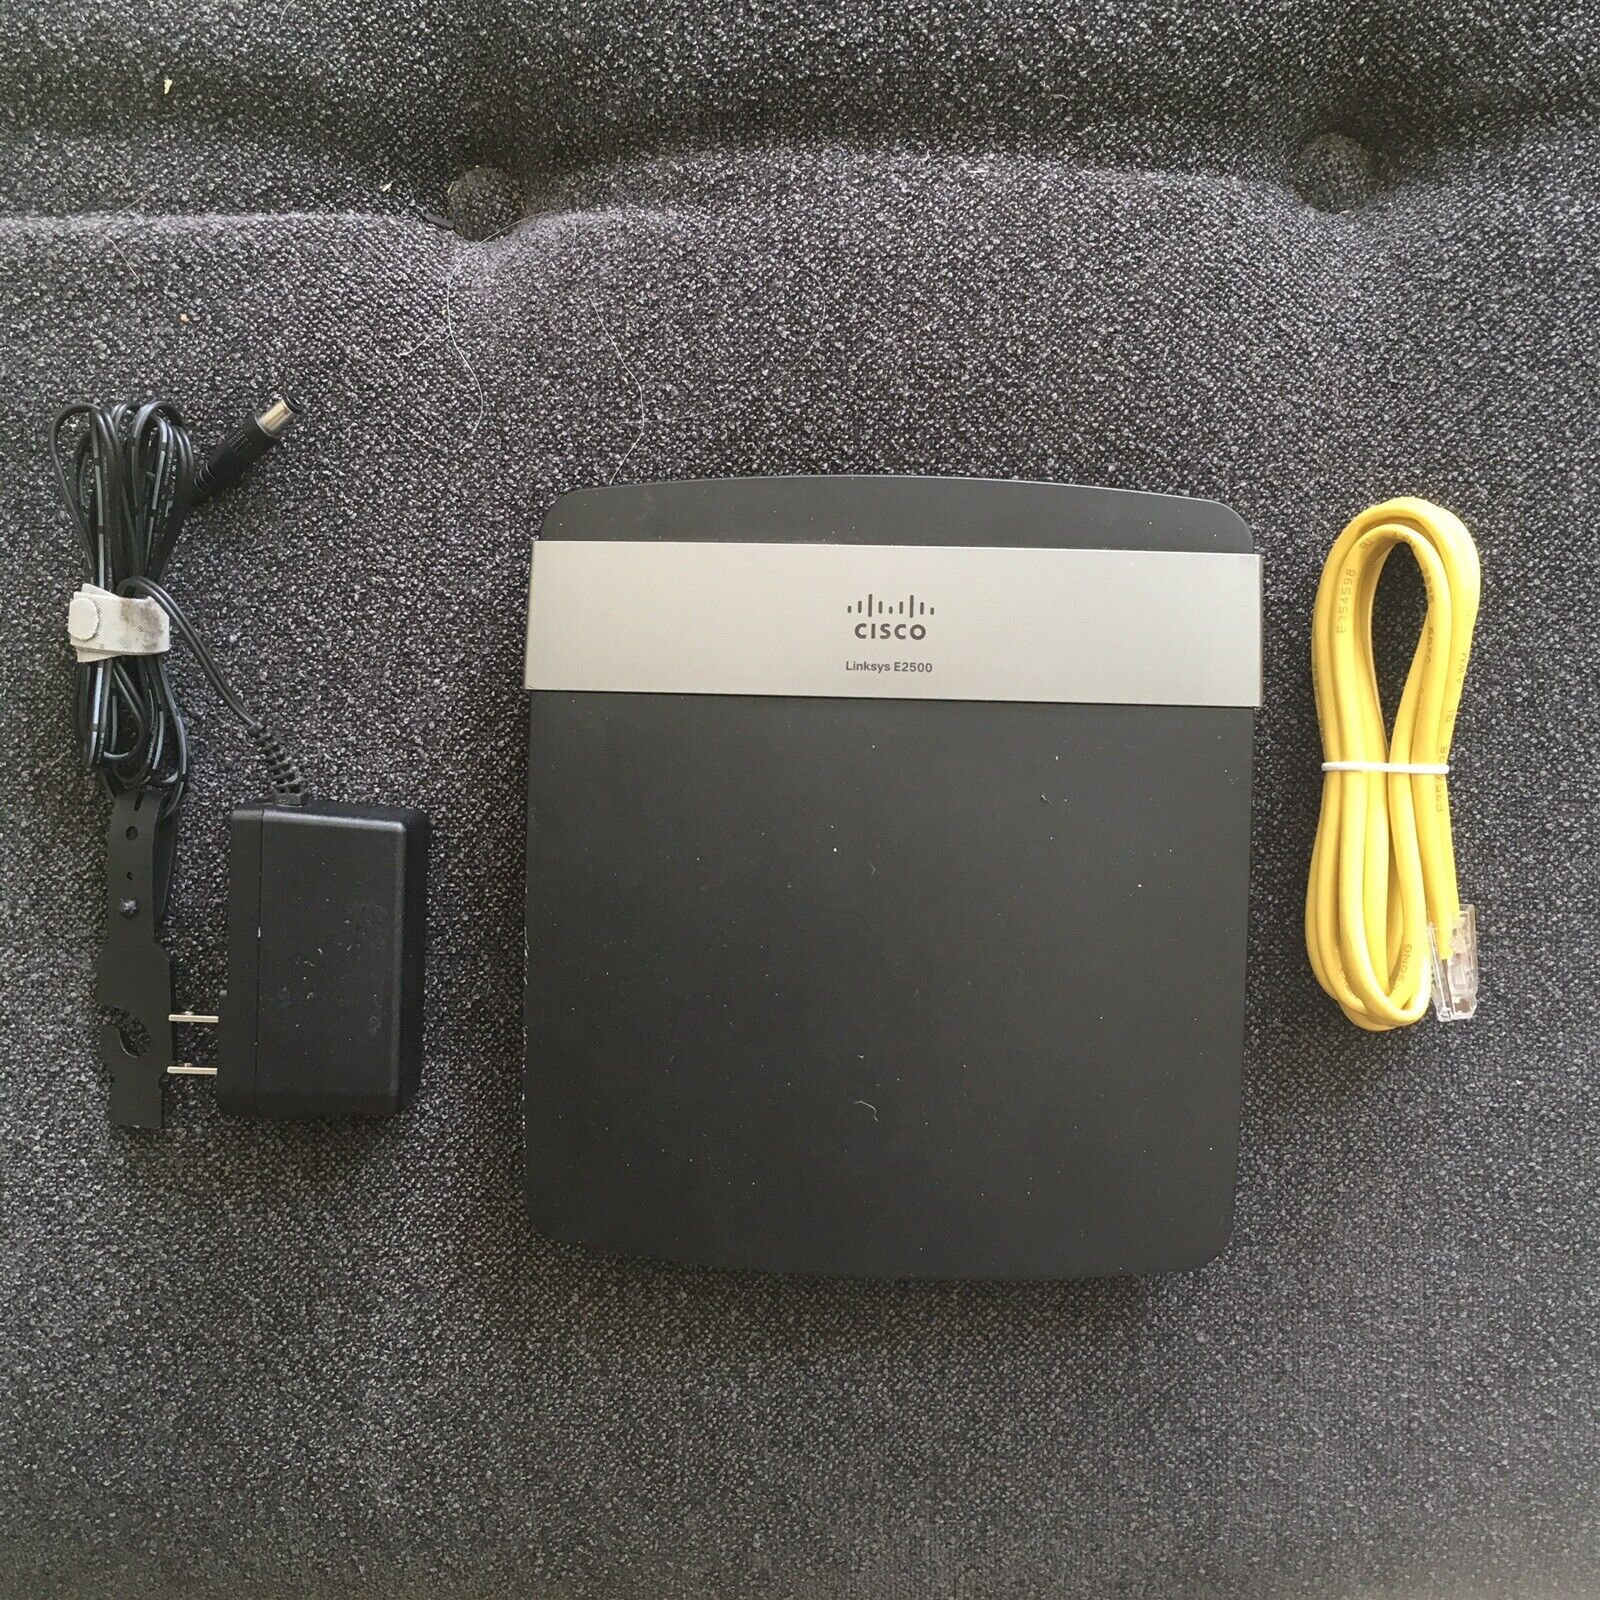 Linksys E2500 Dual -Band Wireless-N Router With Adapter And Ethernet Cable